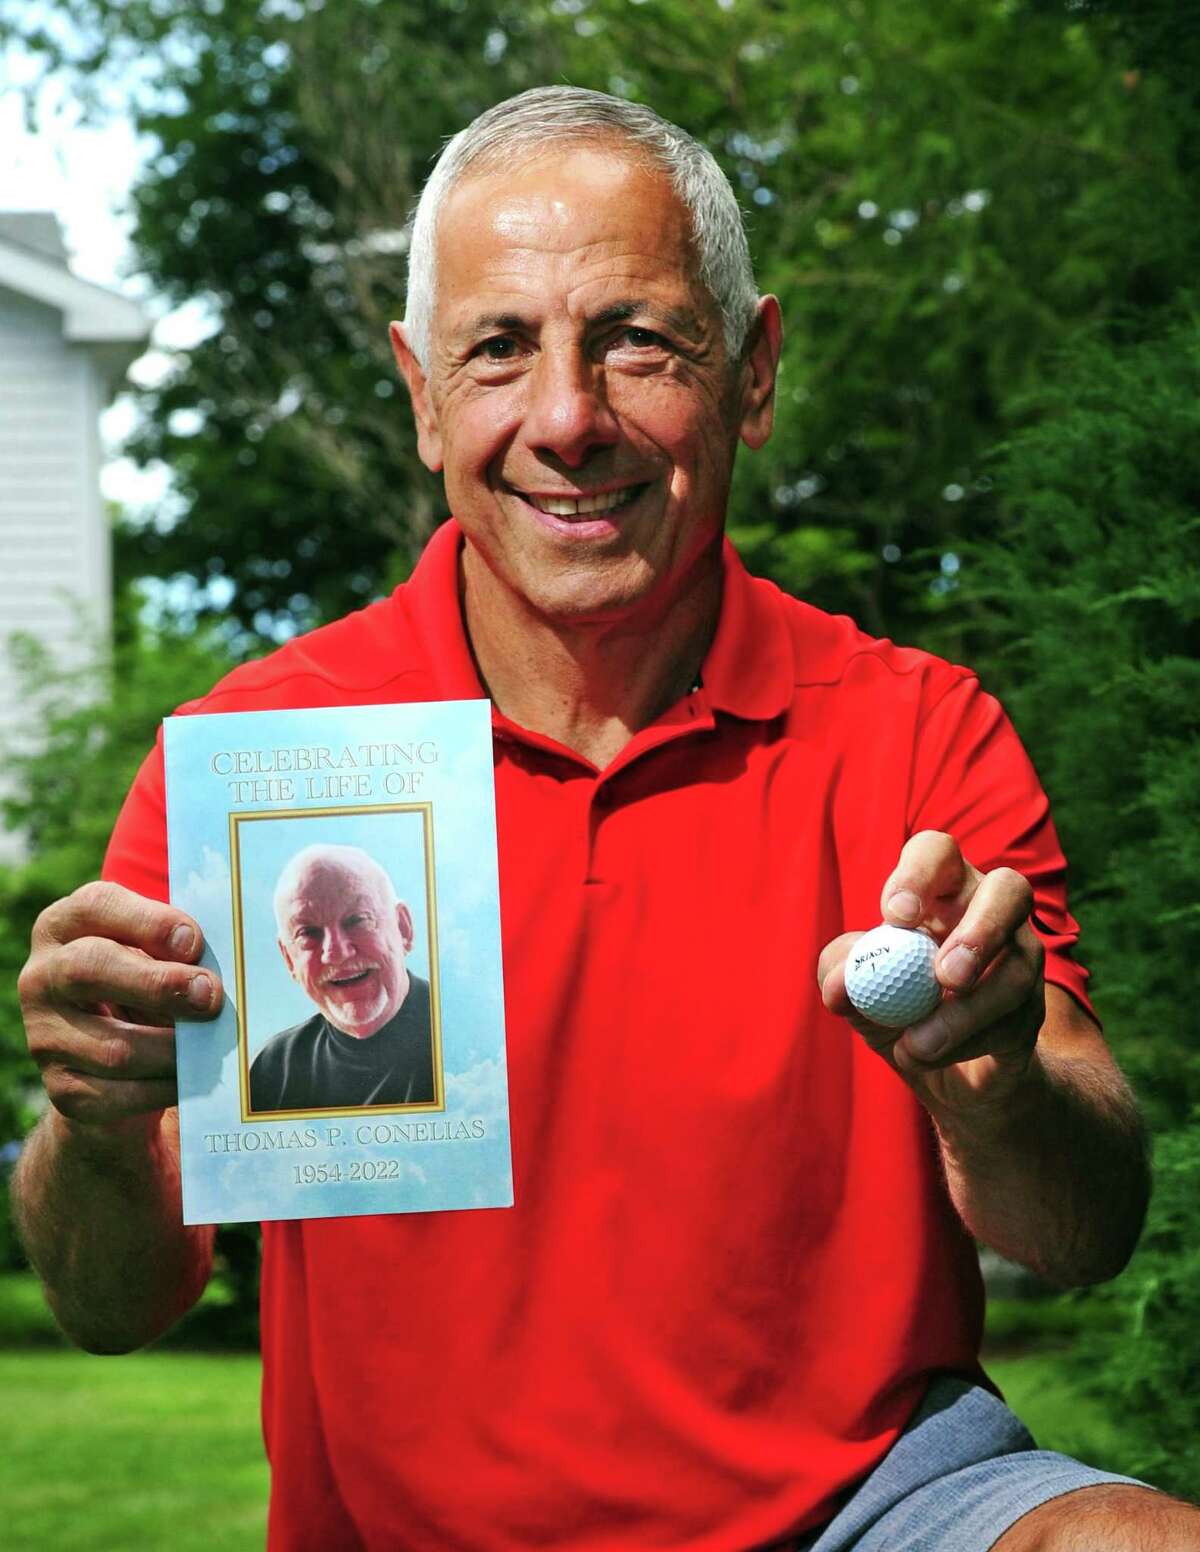 Peter Carino, who recently scored a hole in one at the town's municipal golf course, poses at his home in Greenwich, Conn., on Tuesday June 28, 2022. He did it on May 20 which was also the day his best friend Tom Conelias, (pictured on card) who died suddenly in late April, had done in 2009. They even did it on the same hole, the seventh. The day is also significant because May 20 was the day before Conelias' father's funeral and the birthday of Conelias' late son who had been killed in a car accident when he was 10 years old. Carino felt this was a sign and will try to have the golf ball buried with his friend when the headstone is put in place.